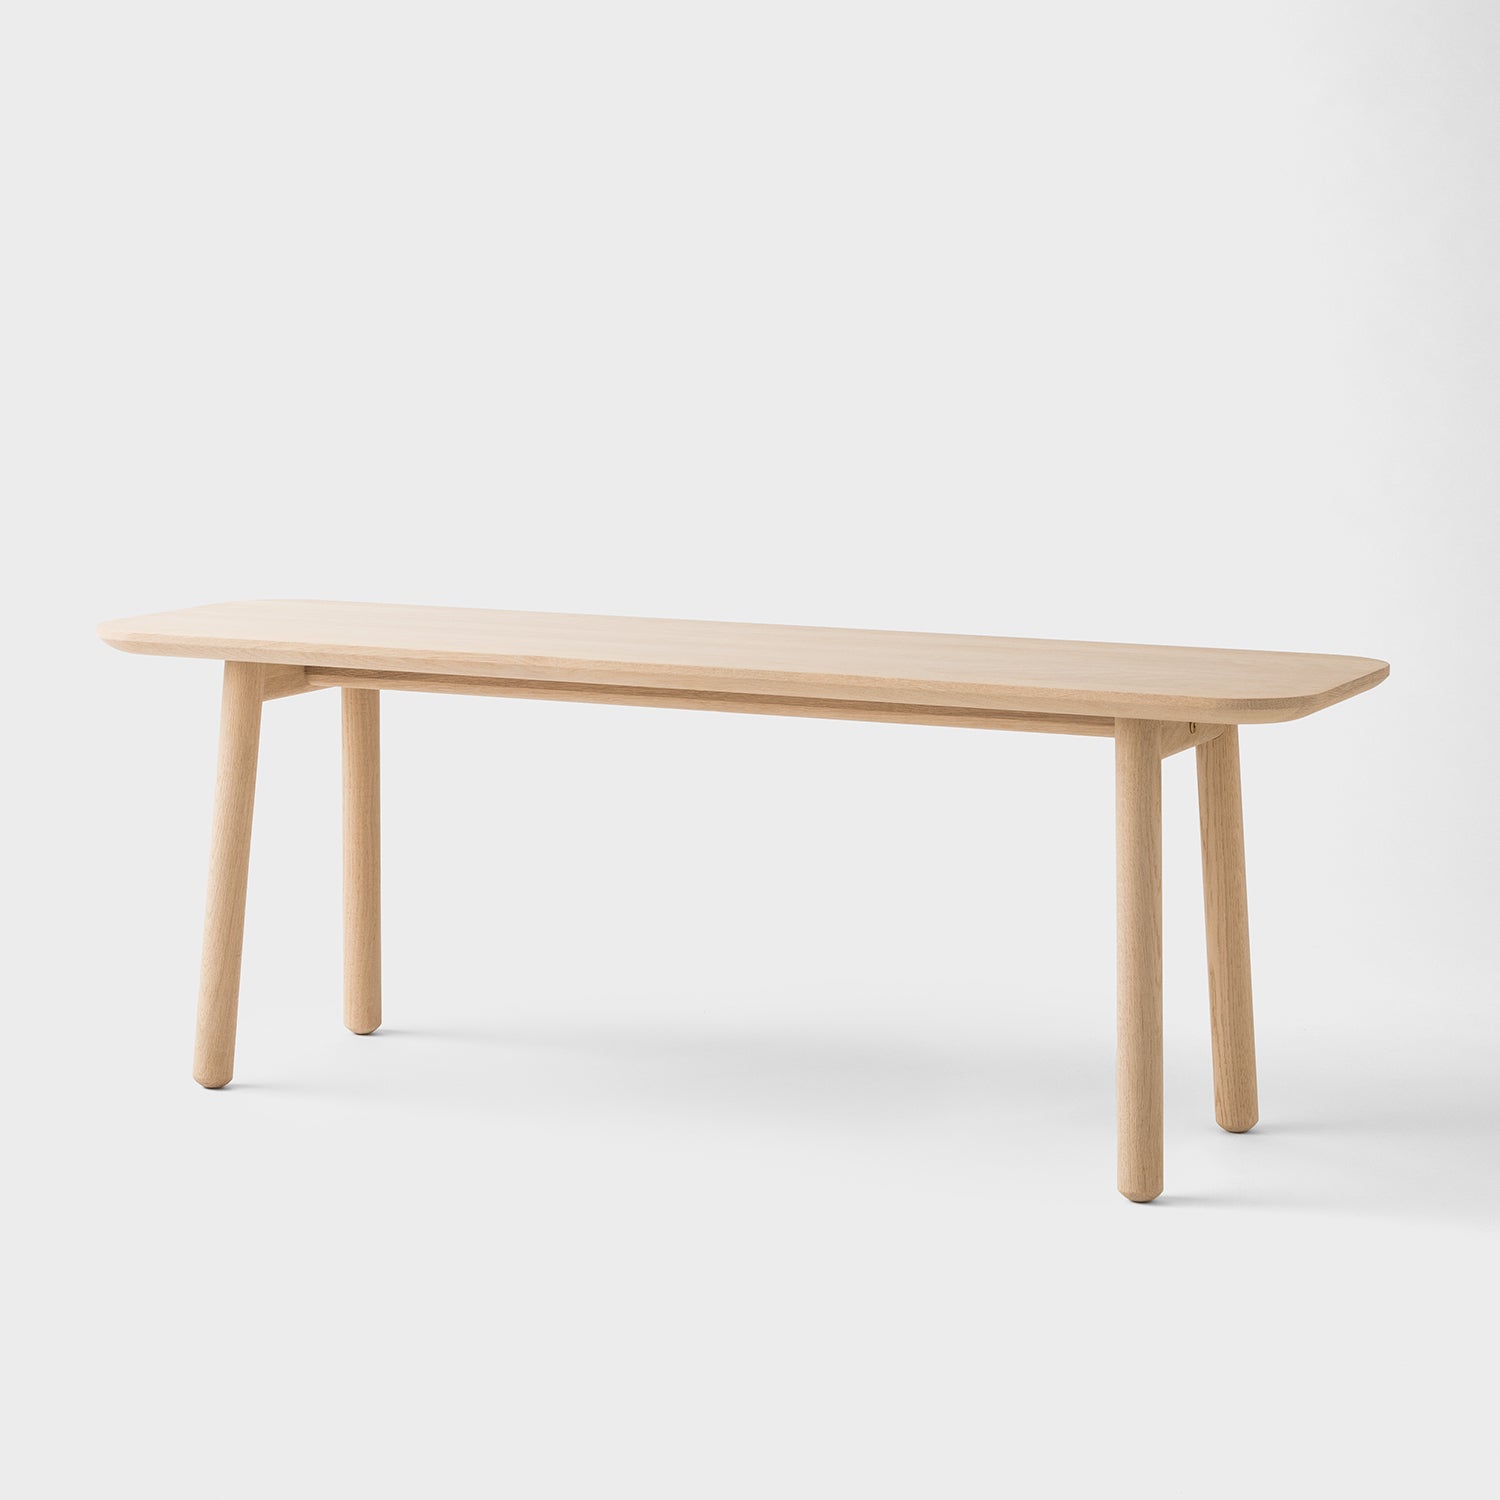 wooden bench with a white background